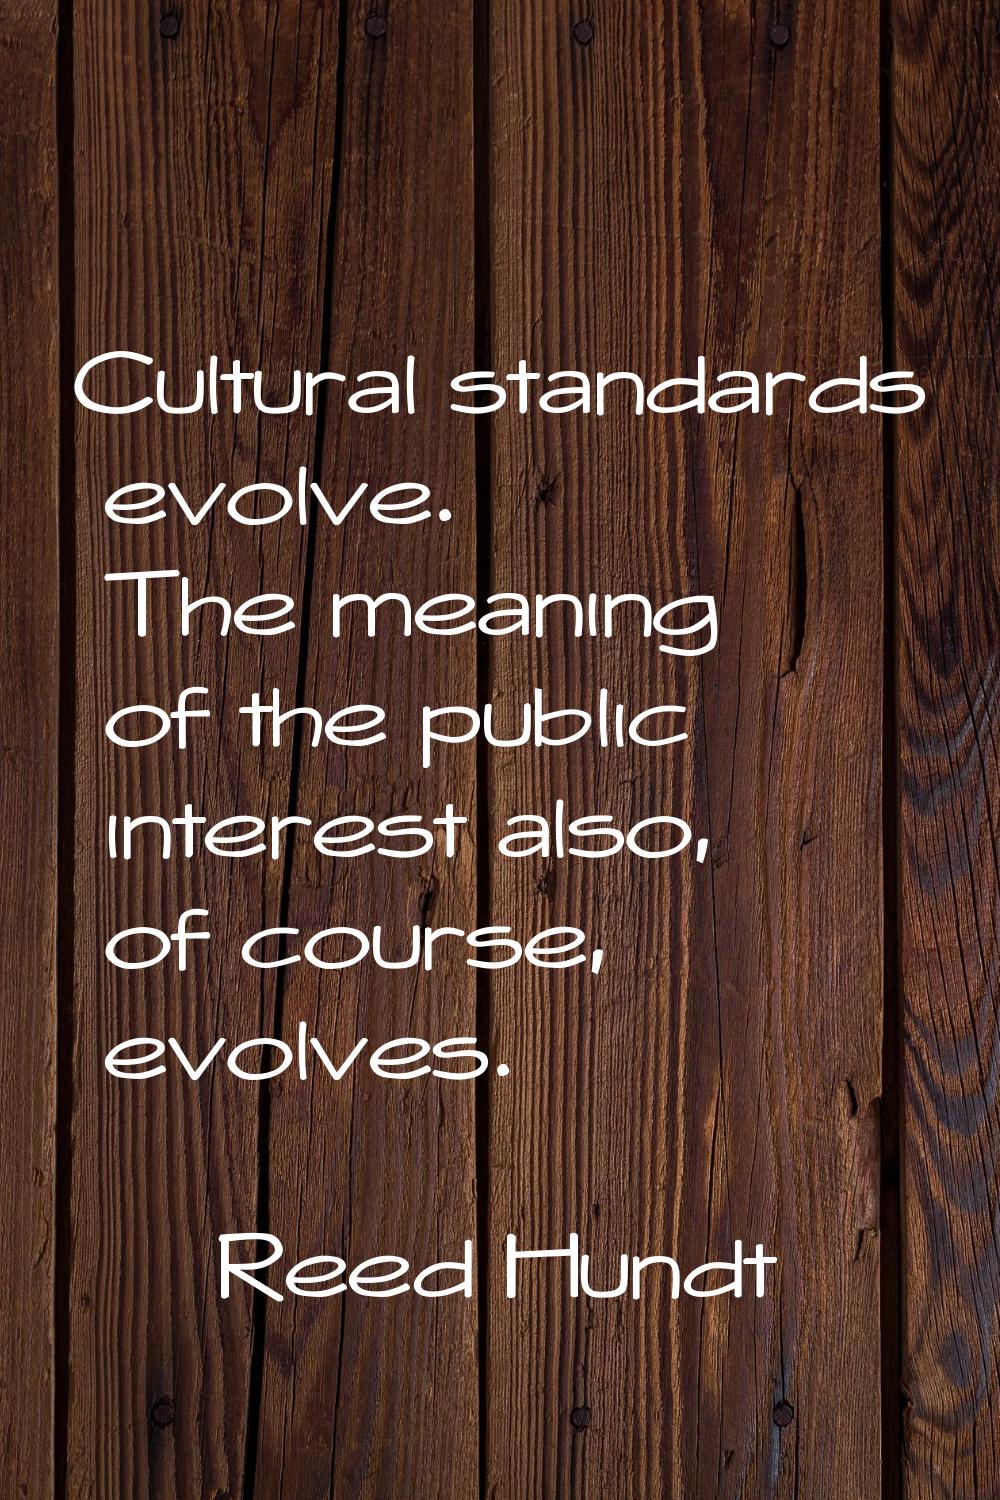 Cultural standards evolve. The meaning of the public interest also, of course, evolves.